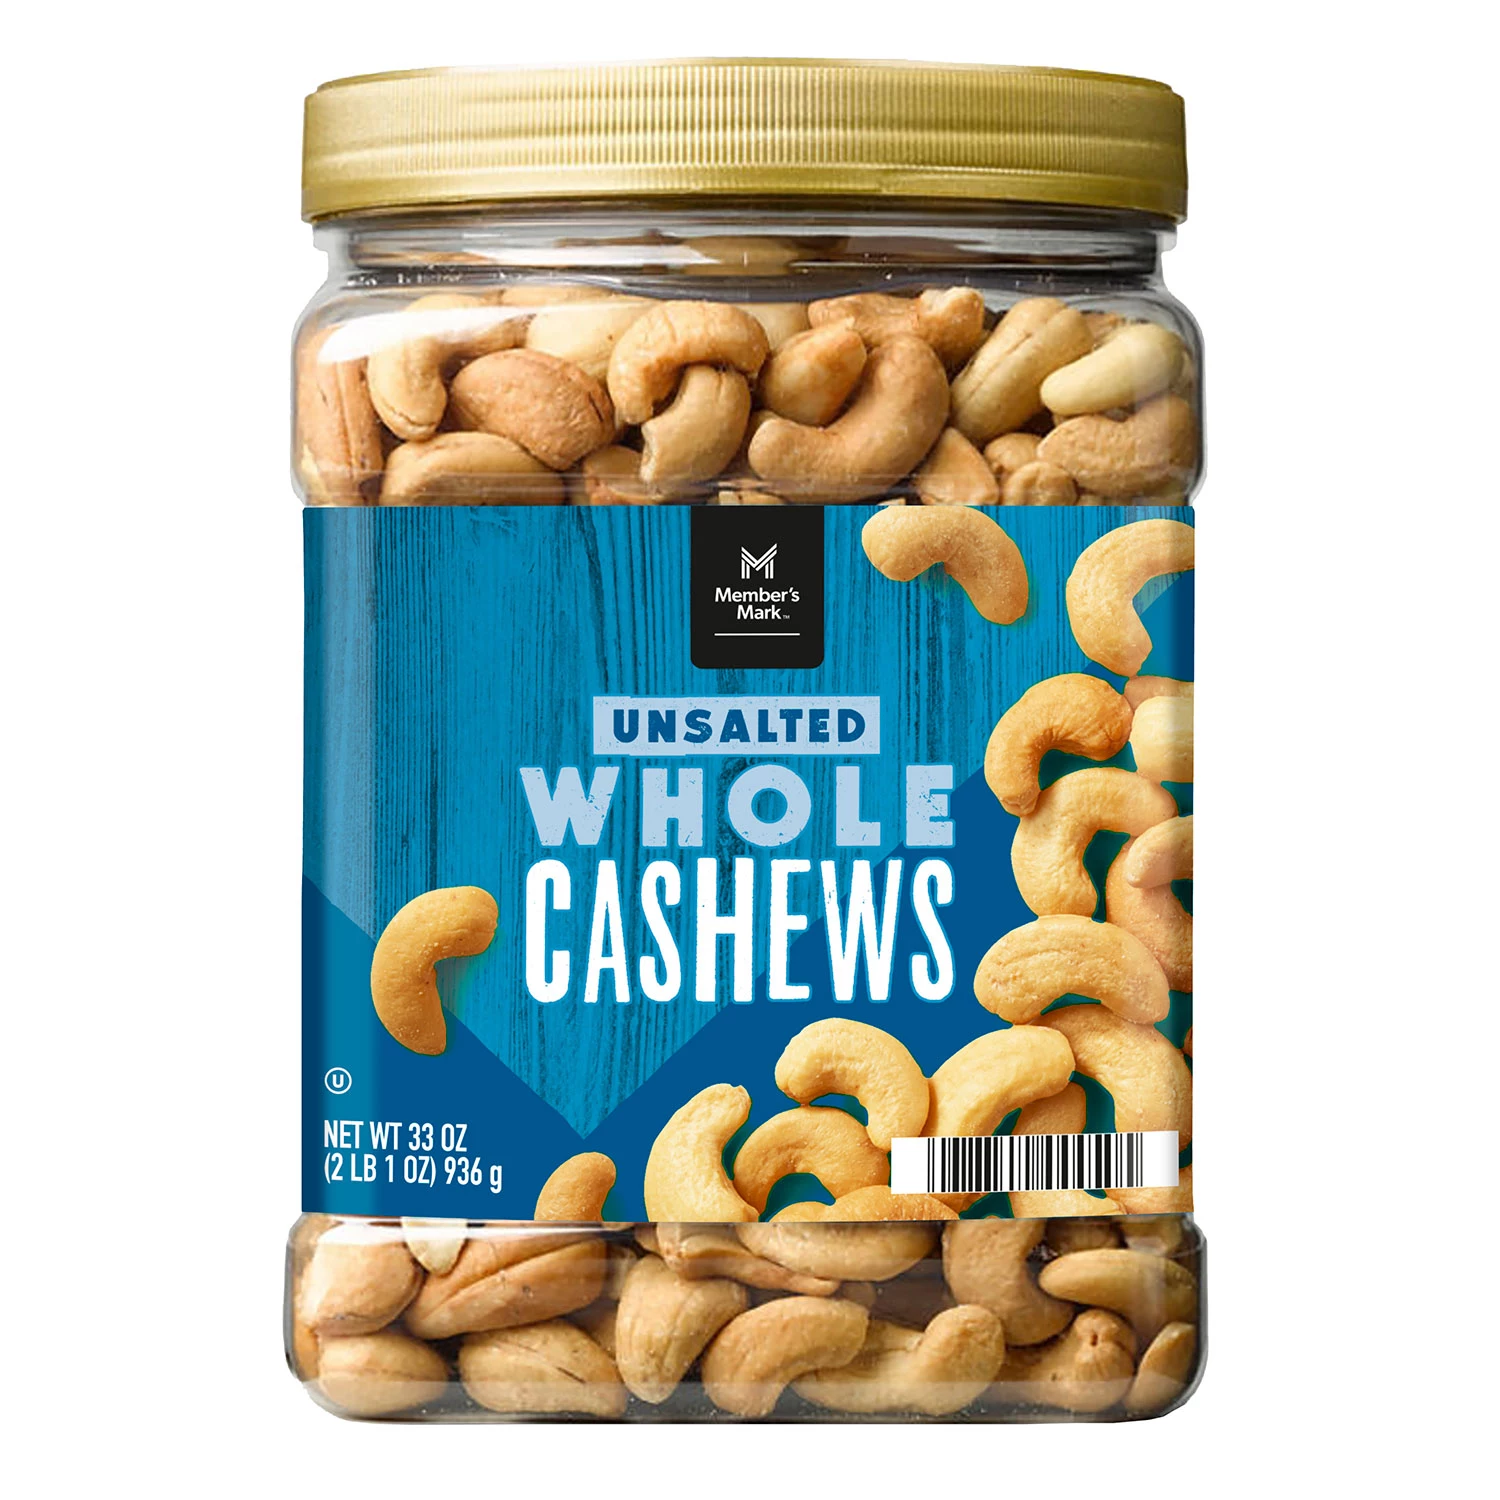 Member's Mark Unsalted Whole Cashews